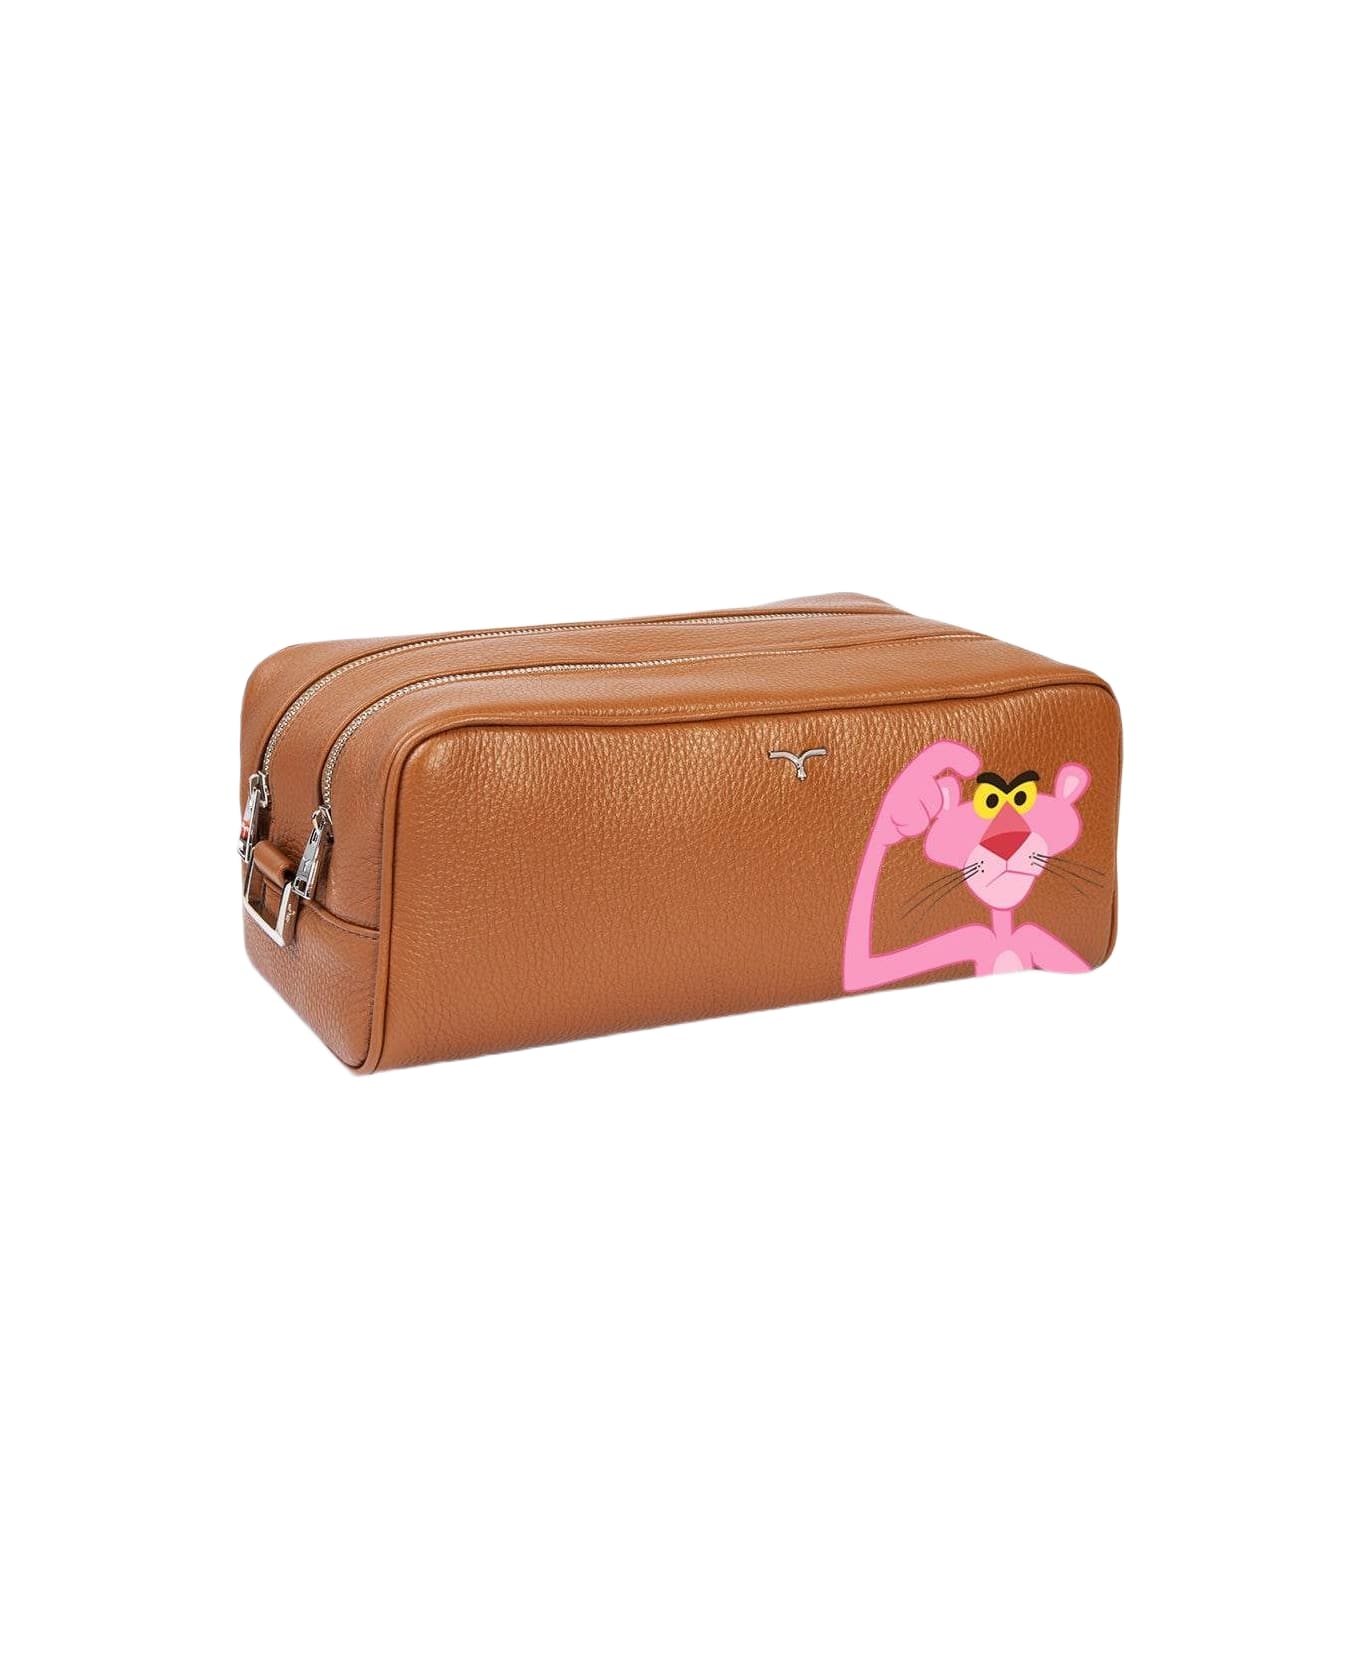 Larusmiani Nécessaire 'pink Panther' Luggage - Sienna